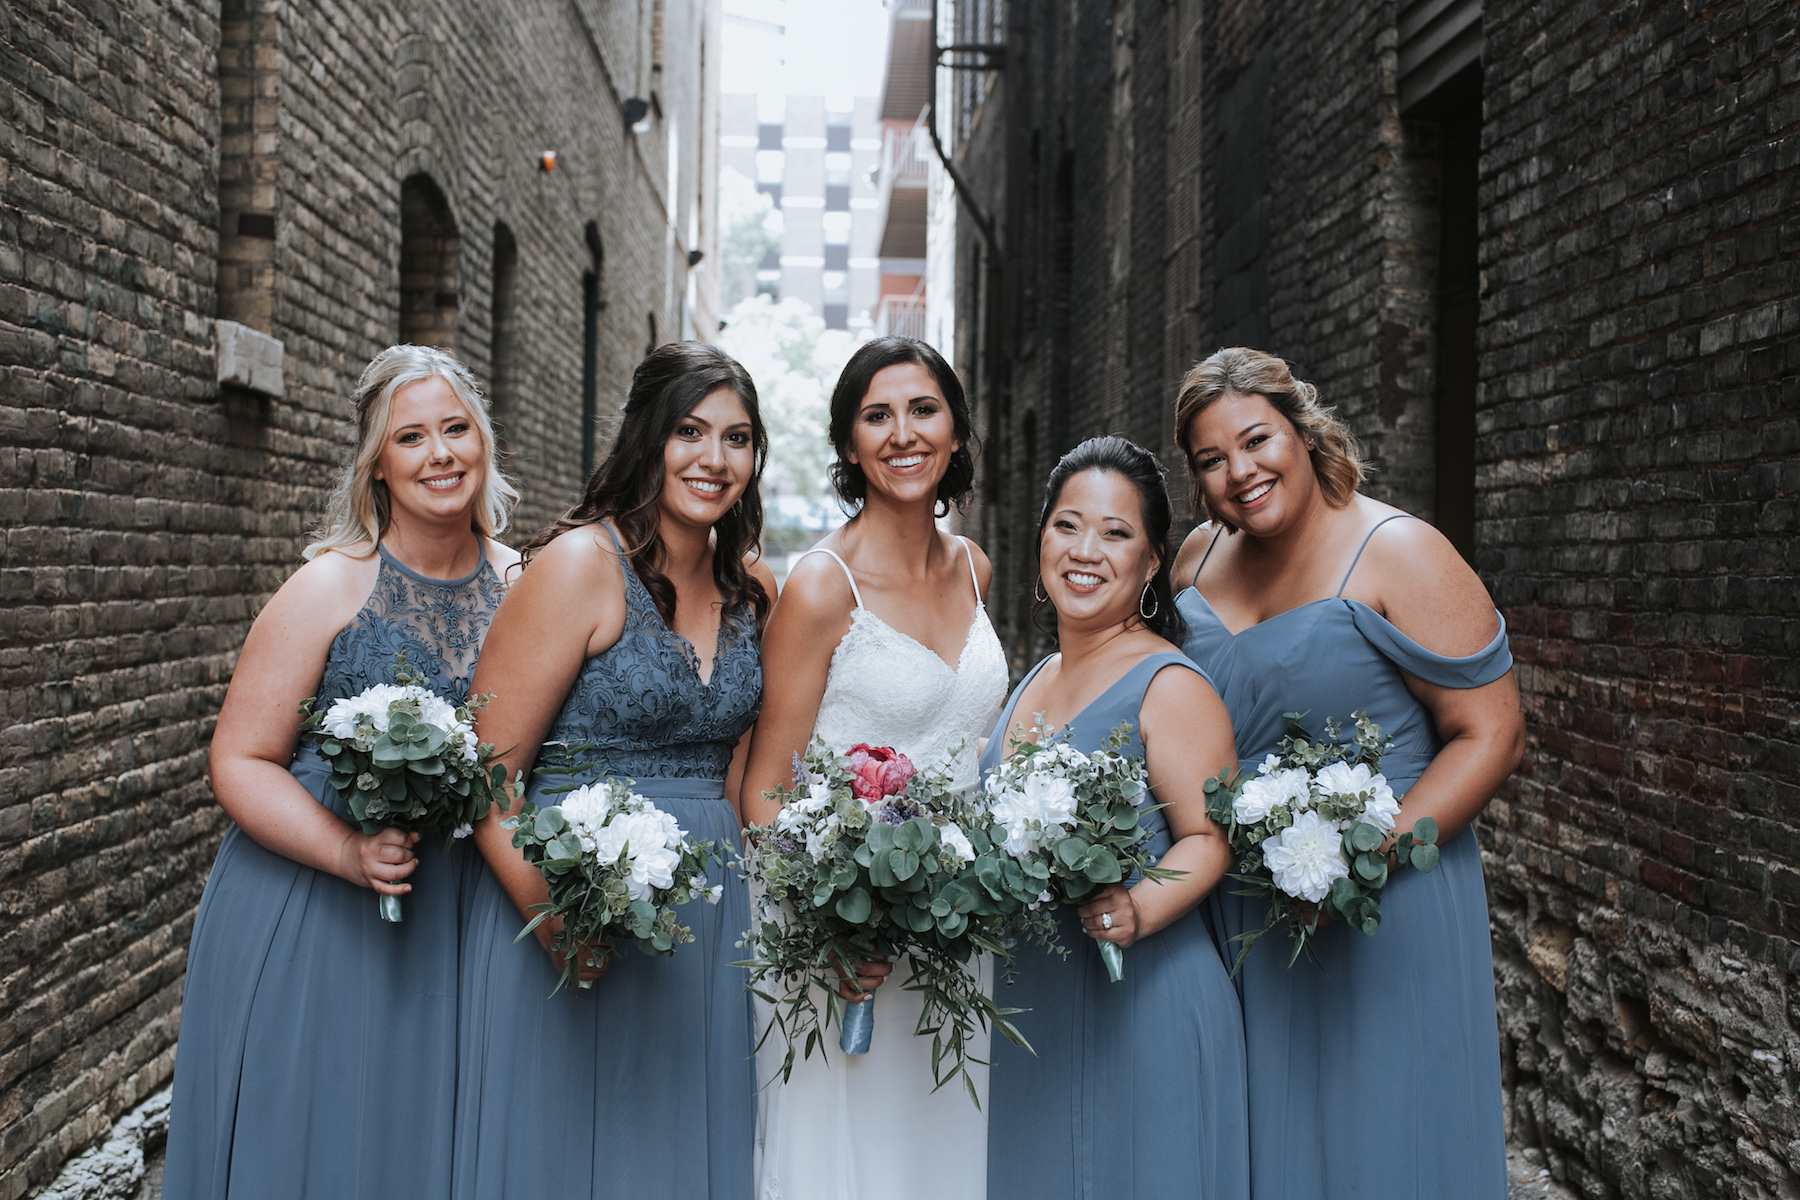 Style Alert: Embroidered Lace Bridesmaid Dresses